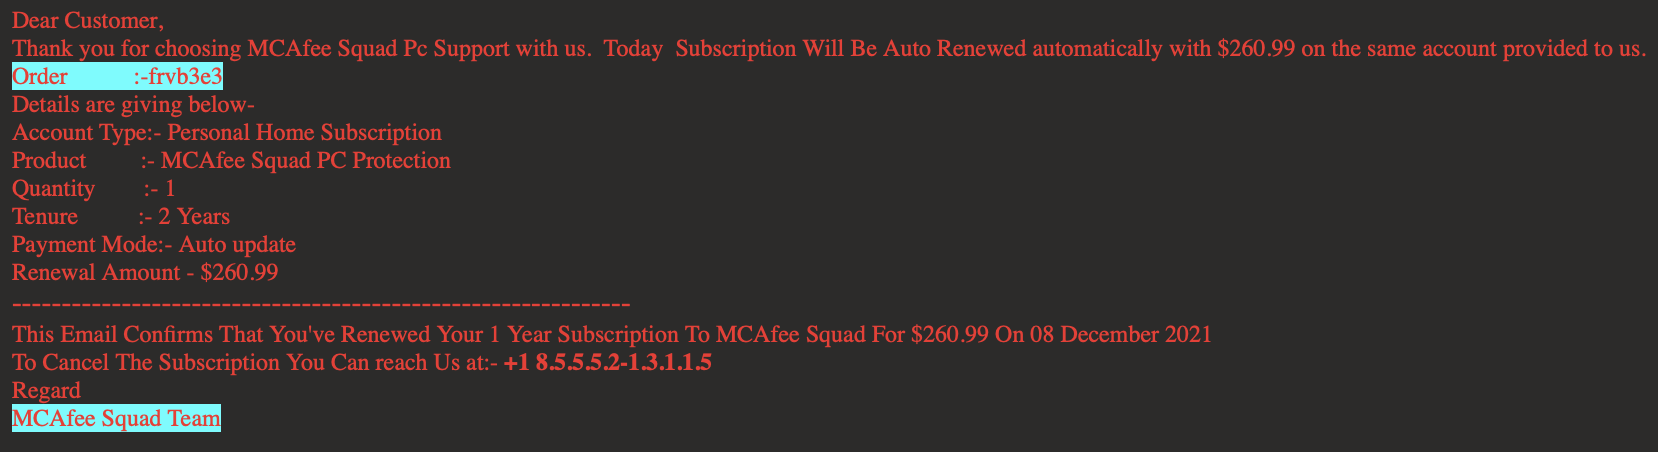 MCAfee Squad Pc Support - Subscription Renewal Scam